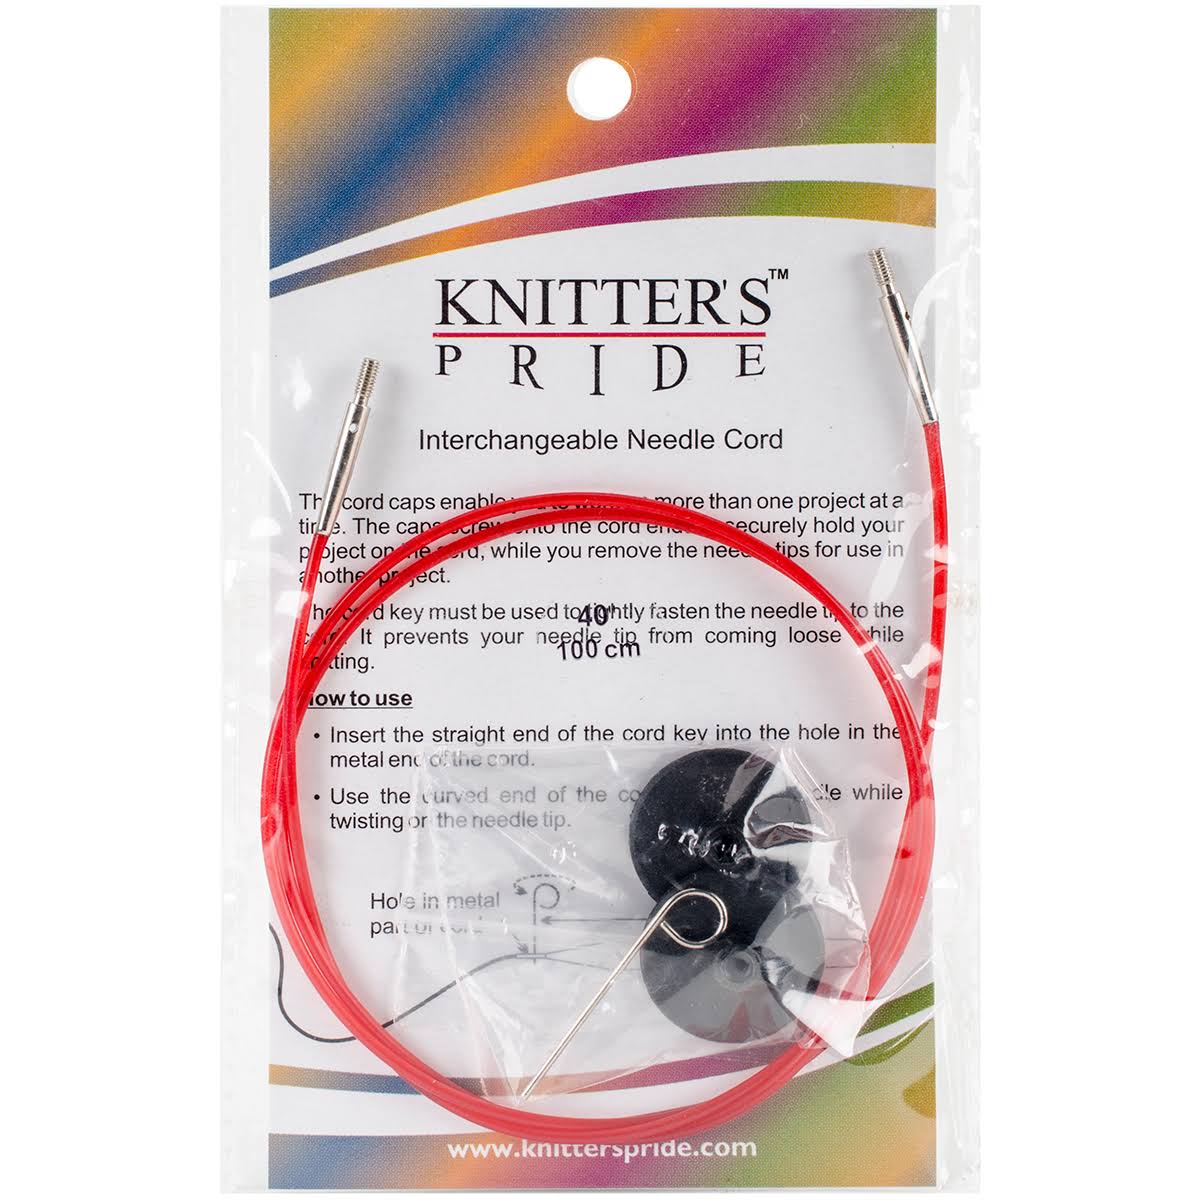 Knitter's Pride Interchangeable Needle Cord - Red